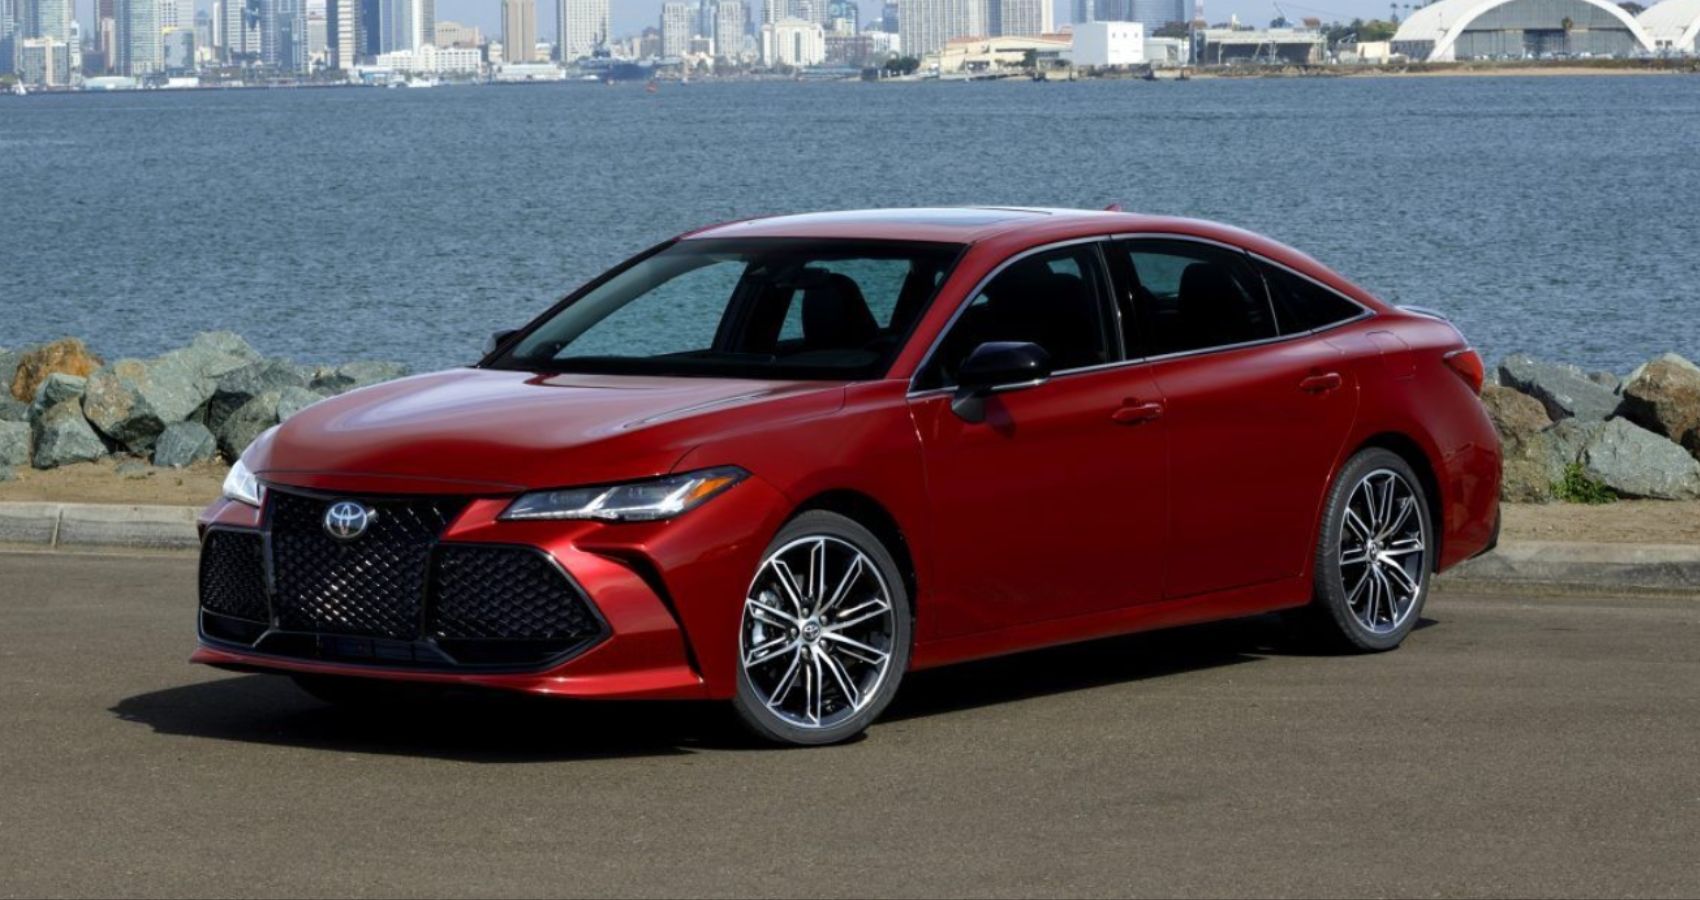 Surprise Review – 2020 Toyota Avalon TRD is Not What I Expected